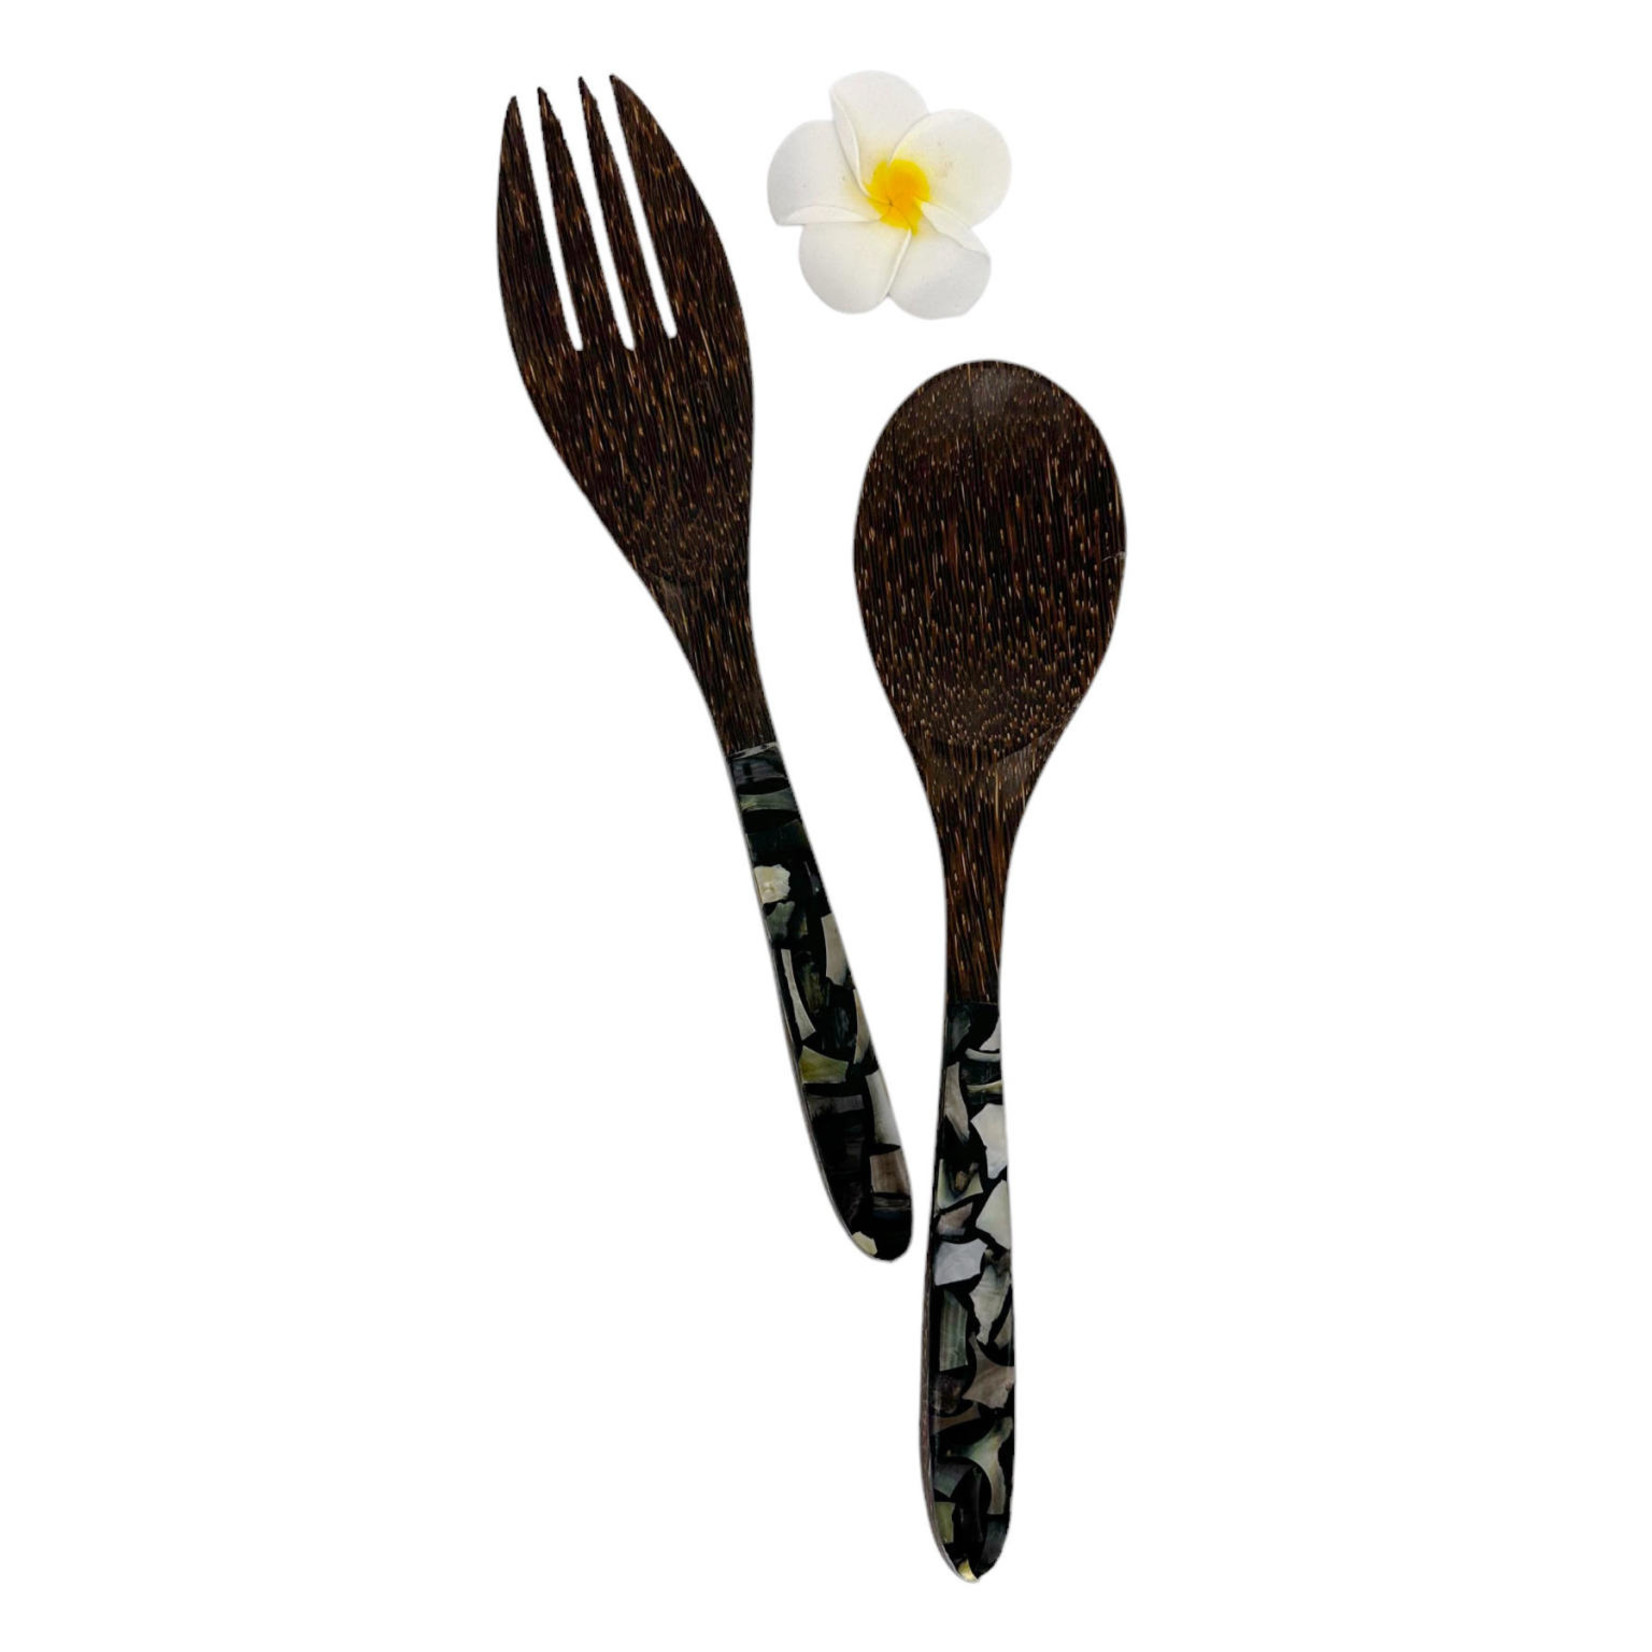 Hand Made Salad Set Palm Wood with Caping Shell Handles 30cm